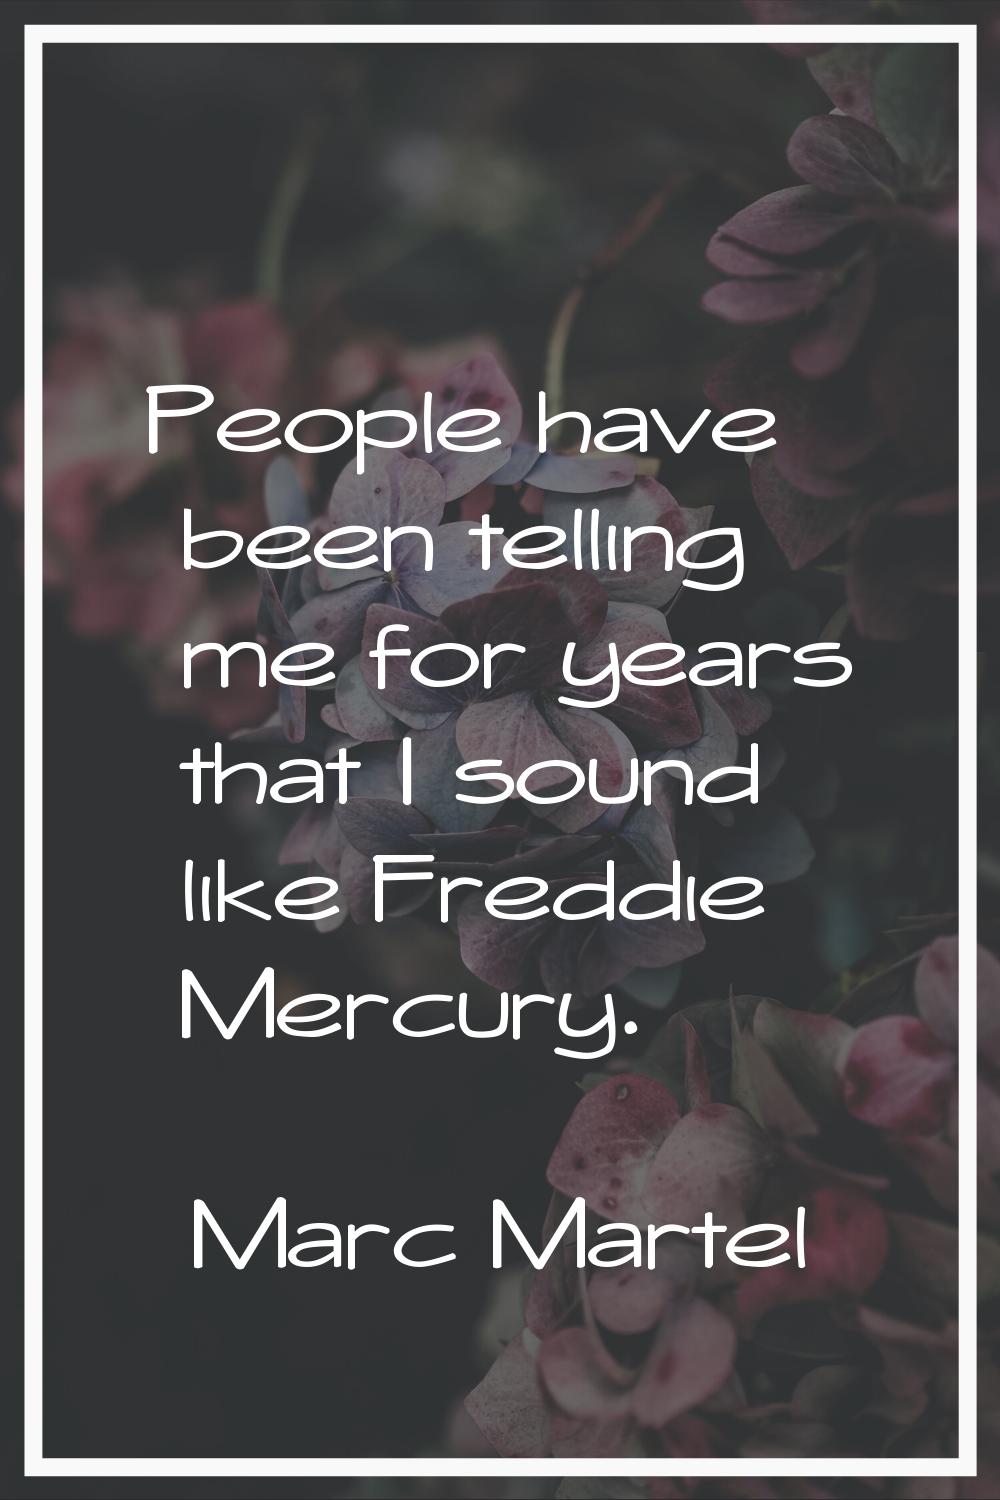 People have been telling me for years that I sound like Freddie Mercury.